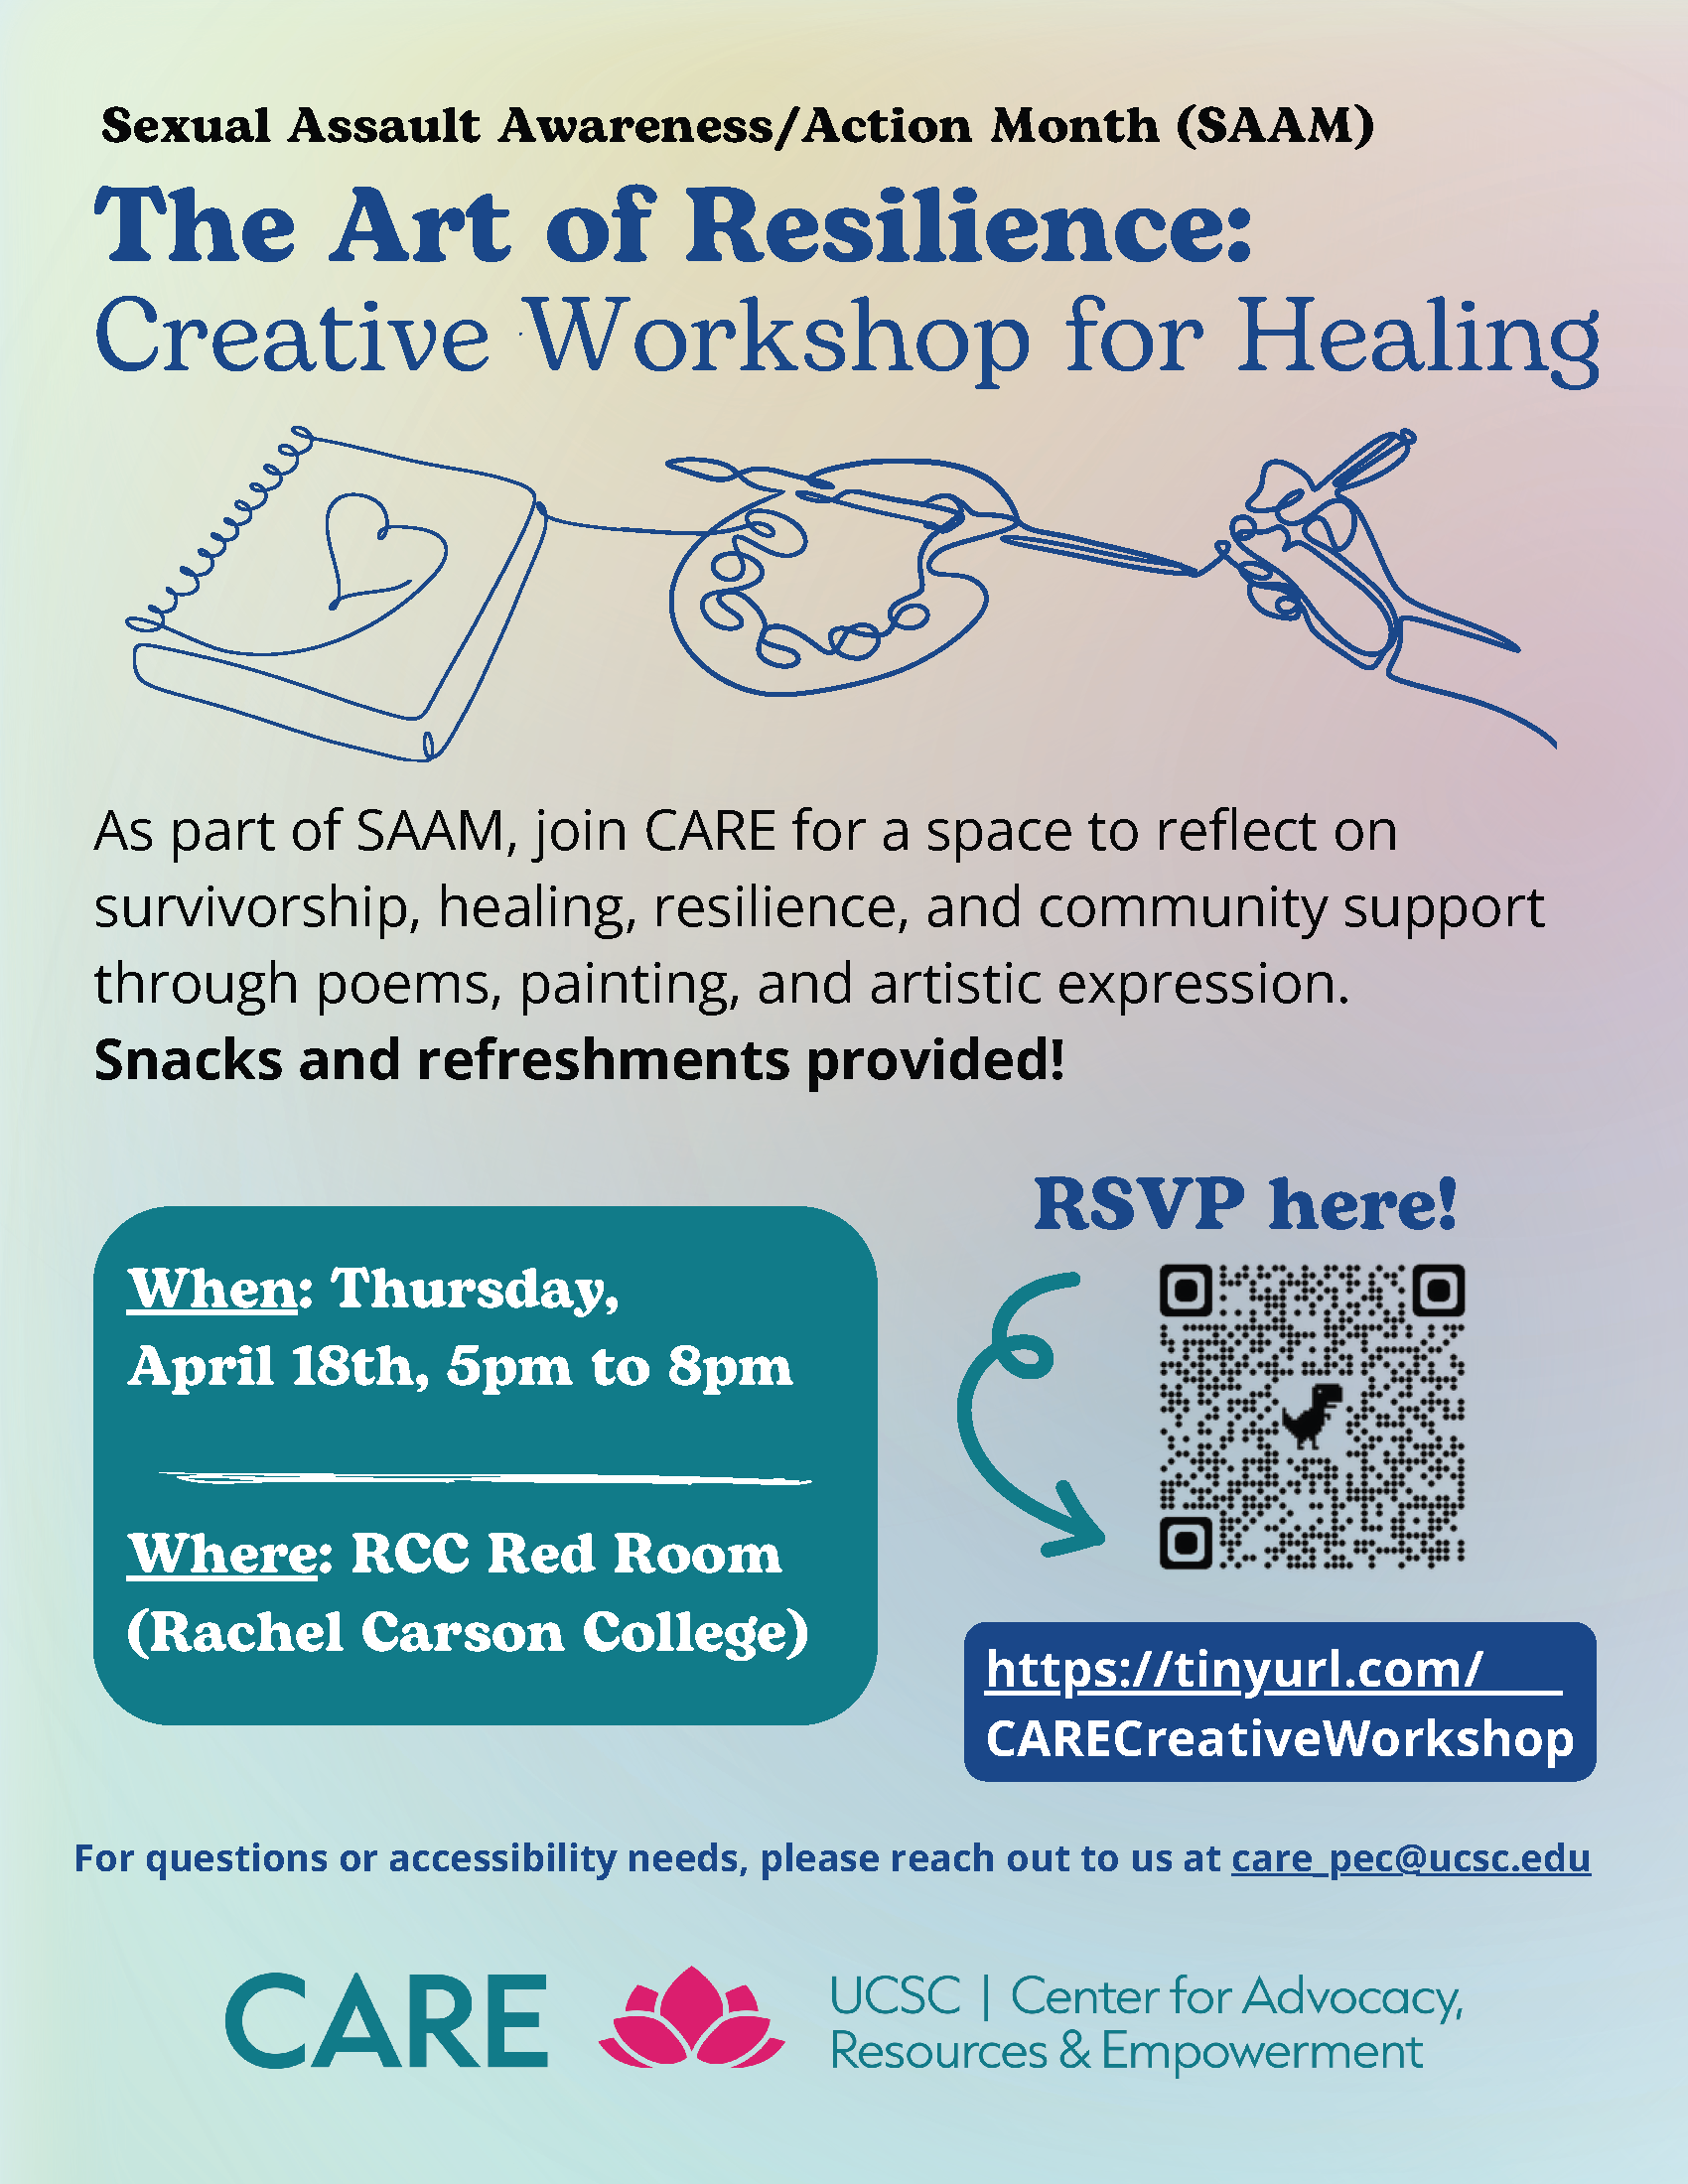 "As part of SAAM, join us Thursday, April 18th from 5-8pm at the Red Room in Rachel Carson College for a space to reflect on survivorship, healing, resilience, and community support through poems, painting, and artistic expression. Snacks and refreshments provided!   Please RSVP at tinyurl.com/CARECreativeWorkshop. Please reach out to us at care_pec@ucsc.edu for any questions, accommodation requests, or accessibility needs."